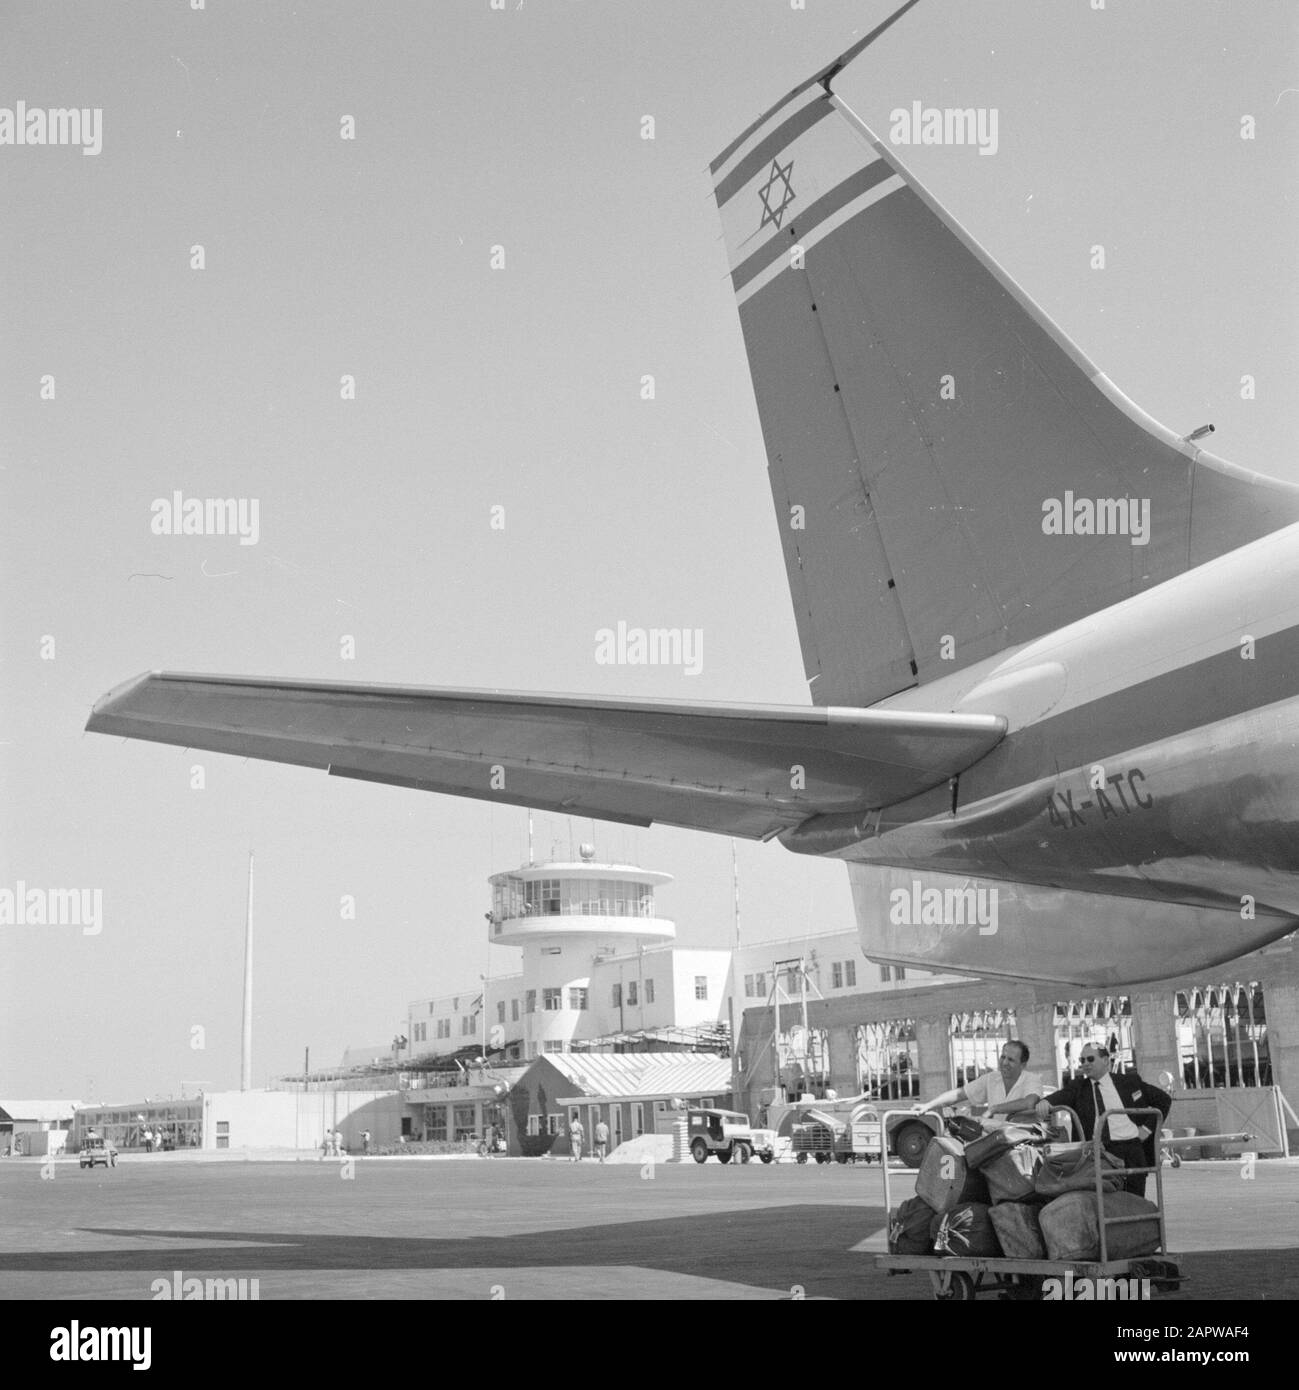 Israel: Lydda Airport (Lod)  Loading and unloading operations at an aircraft Date: undated Location: Israel, Lod Airport, Lydda Airport Keywords: carts, loading and unloading, aviation, traffic stors, aircraft, employees Stock Photo